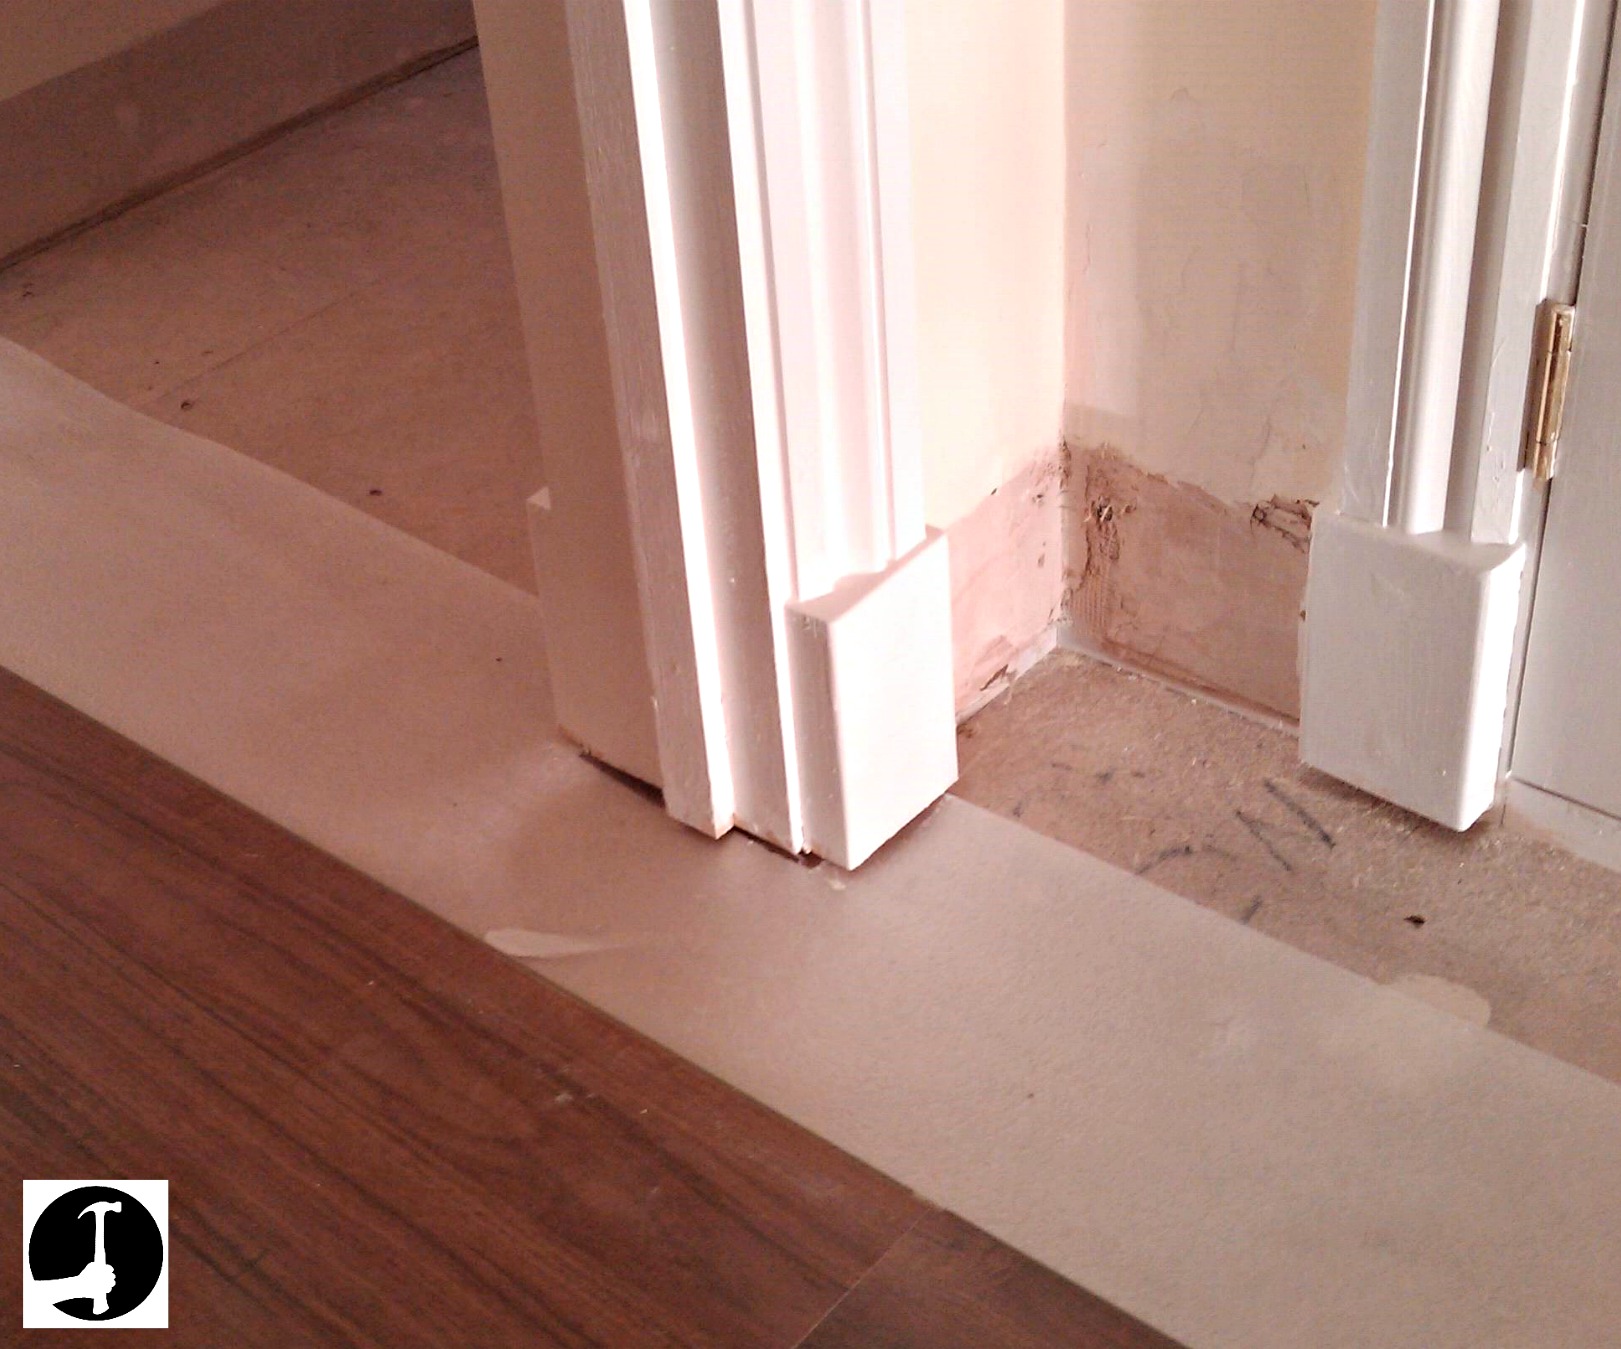 How To Lay Laminate In A Doorway For, Cutting Under Door Frame For Laminate Flooring